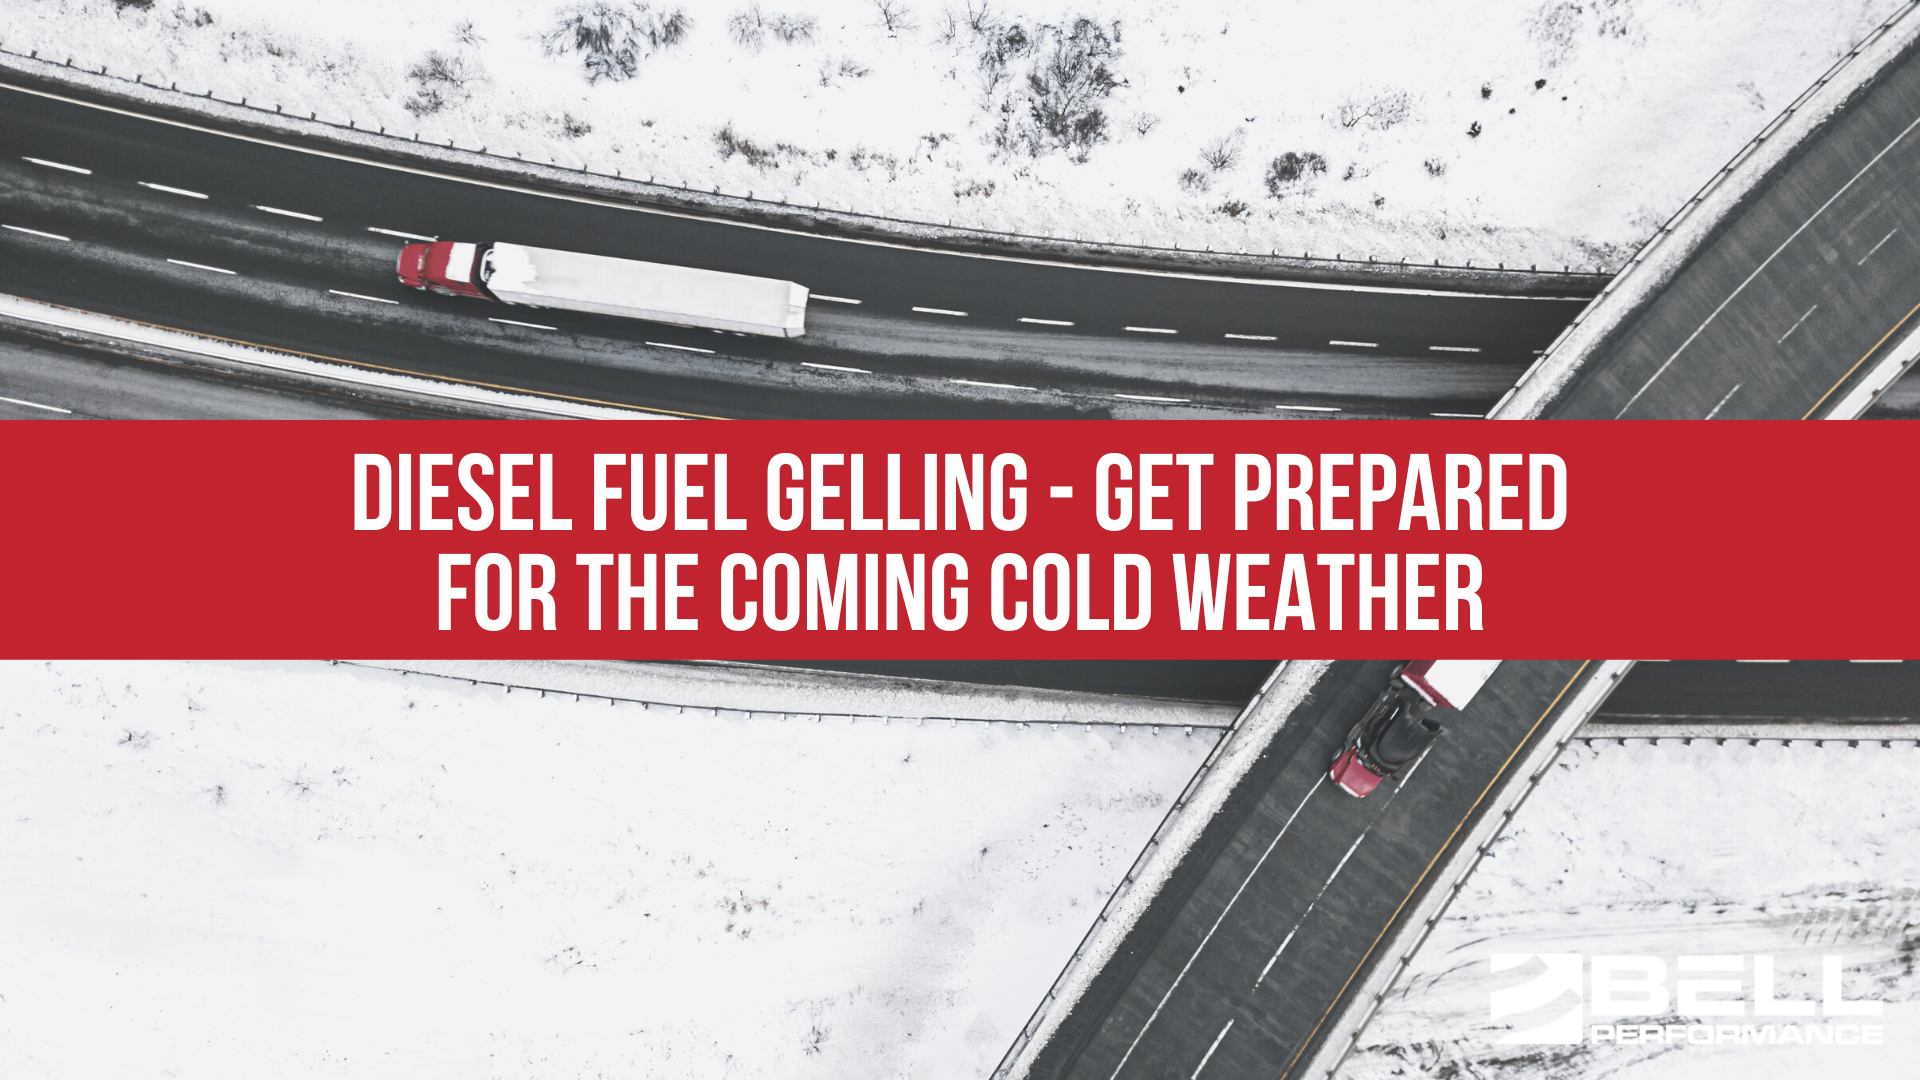 Diesel Fuel Gelling - Get Prepared for the Coming Cold Weather